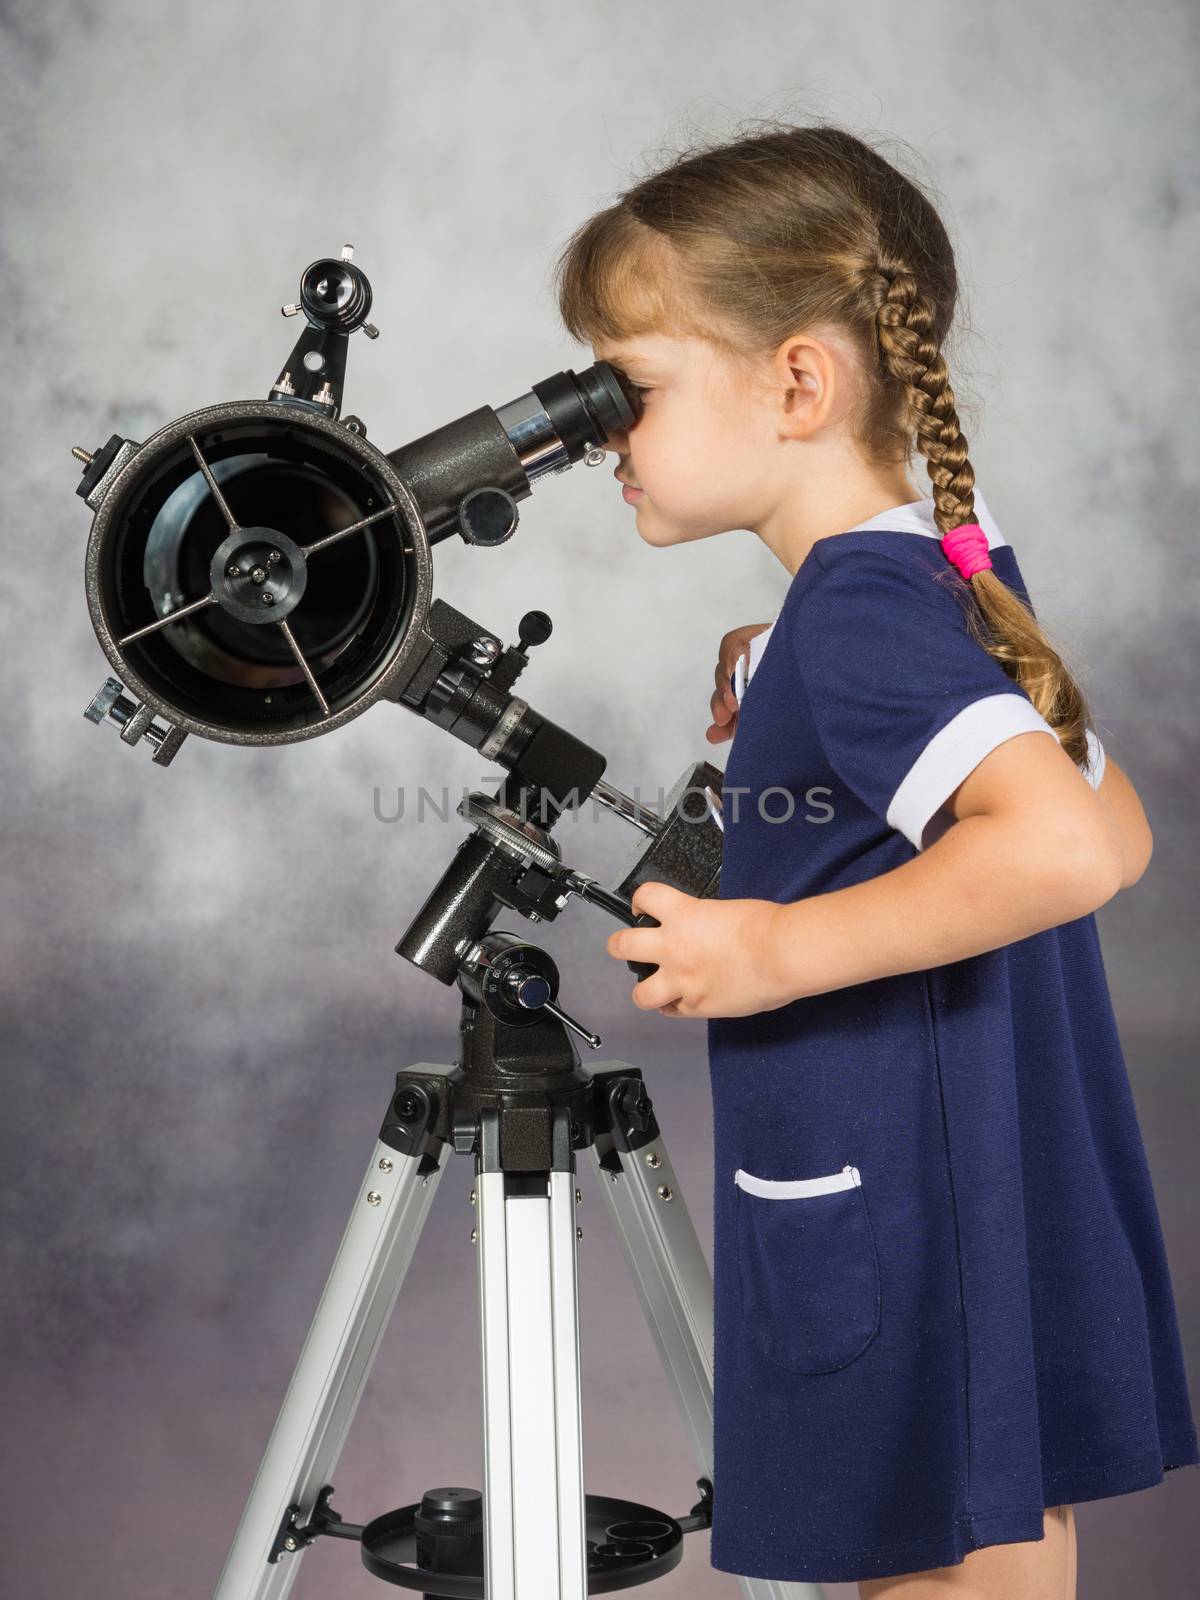 Girl amateur astronomers looking into the telescope eyepiece